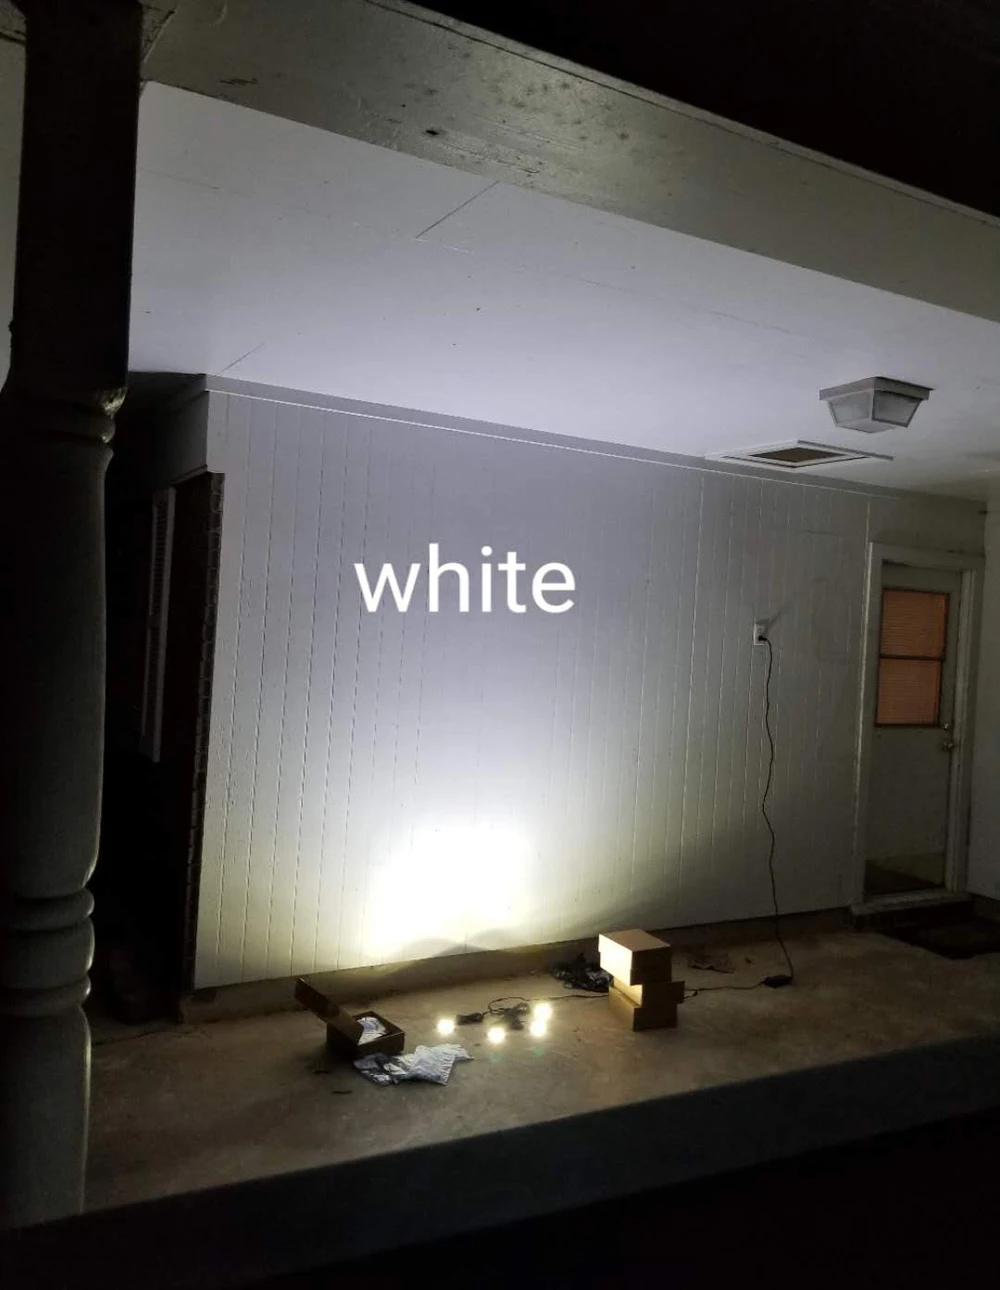 Factory Sell 24W White Rock Lights With 450cm Lead per light